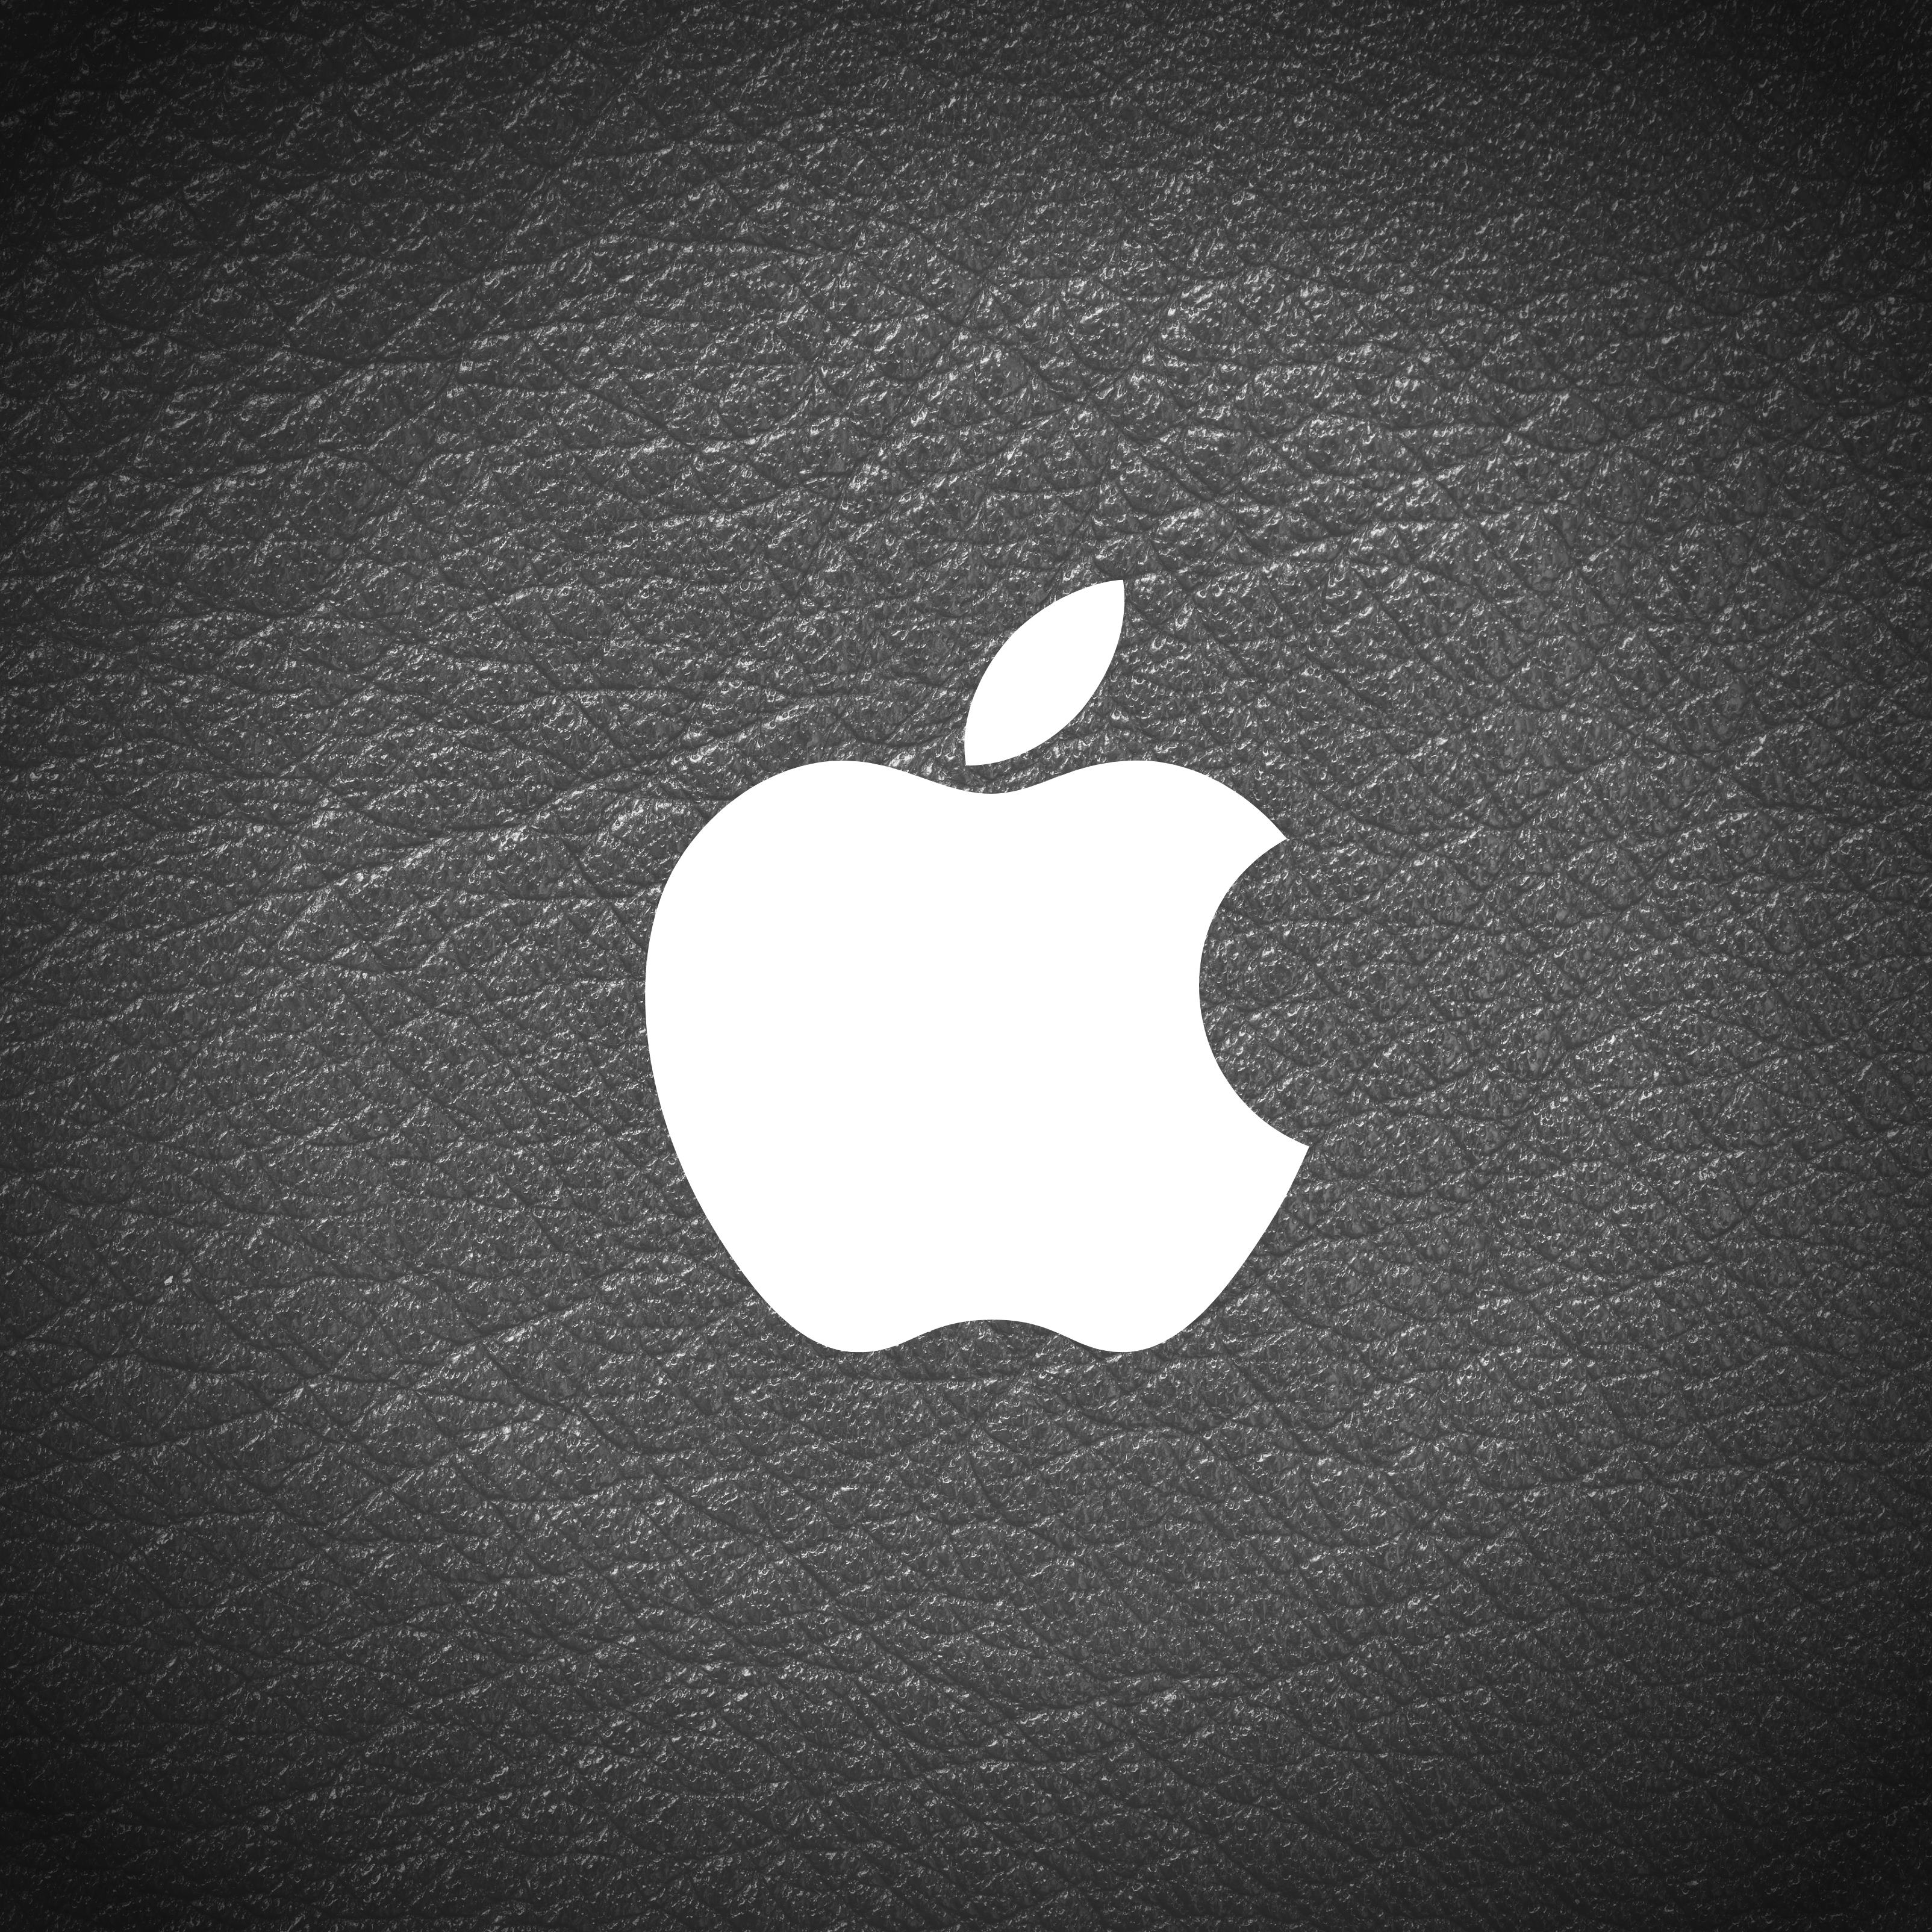 iPad Air 2 wallpapers Apple Logo Leather Black and White iPad Wallpaper